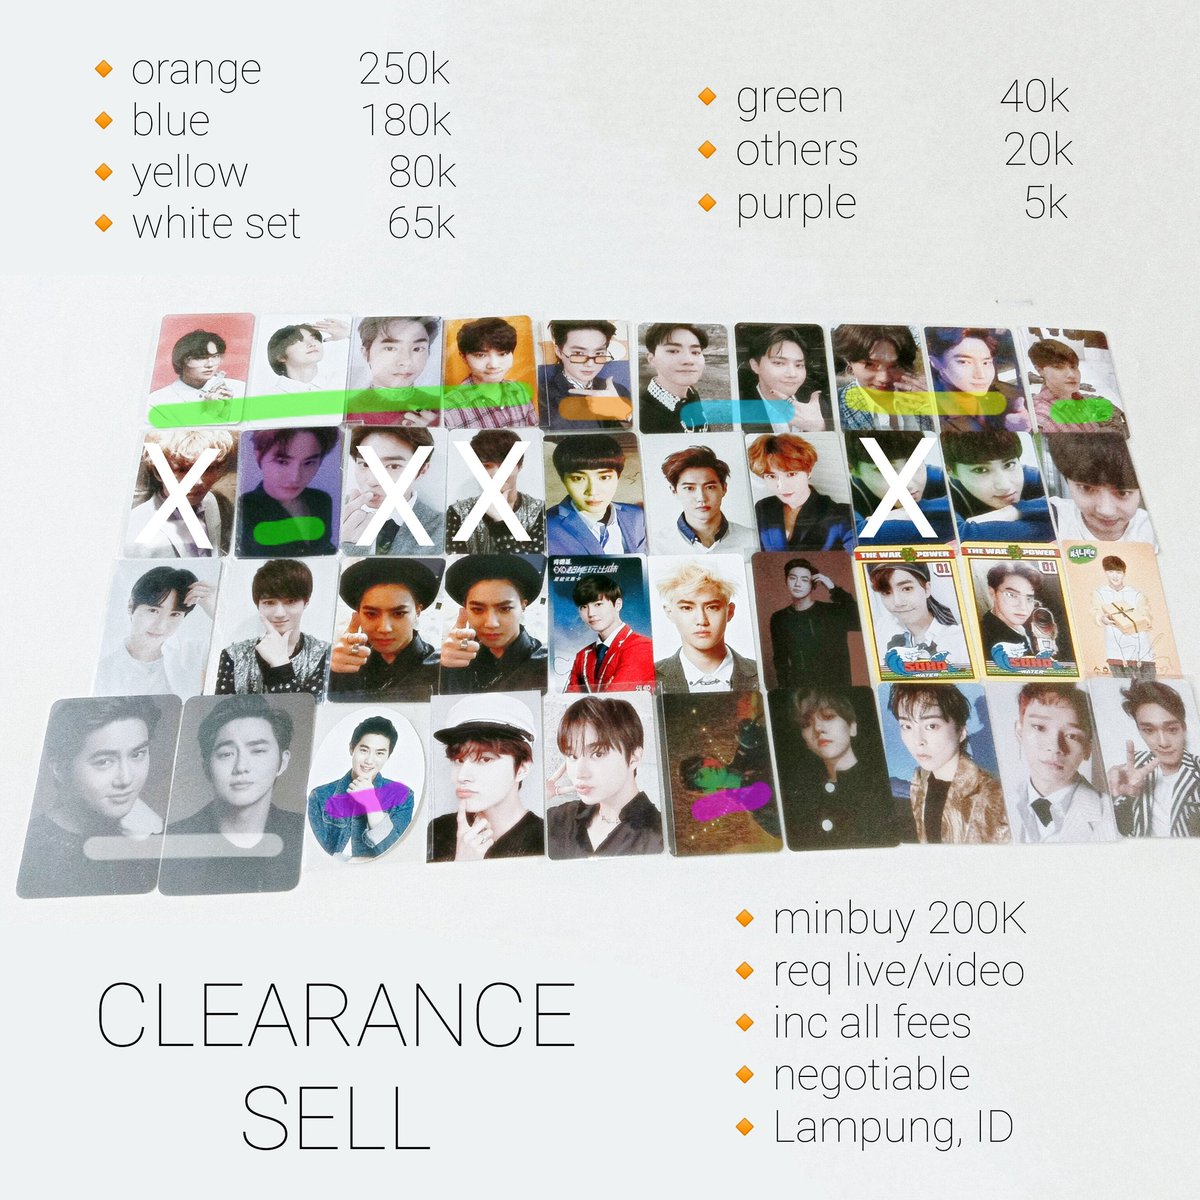 ‼️UPDATE ‼️

･ ｡ﾟ☆: ─── Want to Sell *.◕દ◕ .* 

#EXO mostly Suho photocard official

˙❥˙ PRICE on Pict
˙❥˙ SERIOUS BUYER ONLY!
˙❥˙ Keep event DP

wts pasar exo suho baekhyun xiumin chen nct127 jungwoo mumo japan pop kihno cincin murah greysuit sg23 smstore power dftf